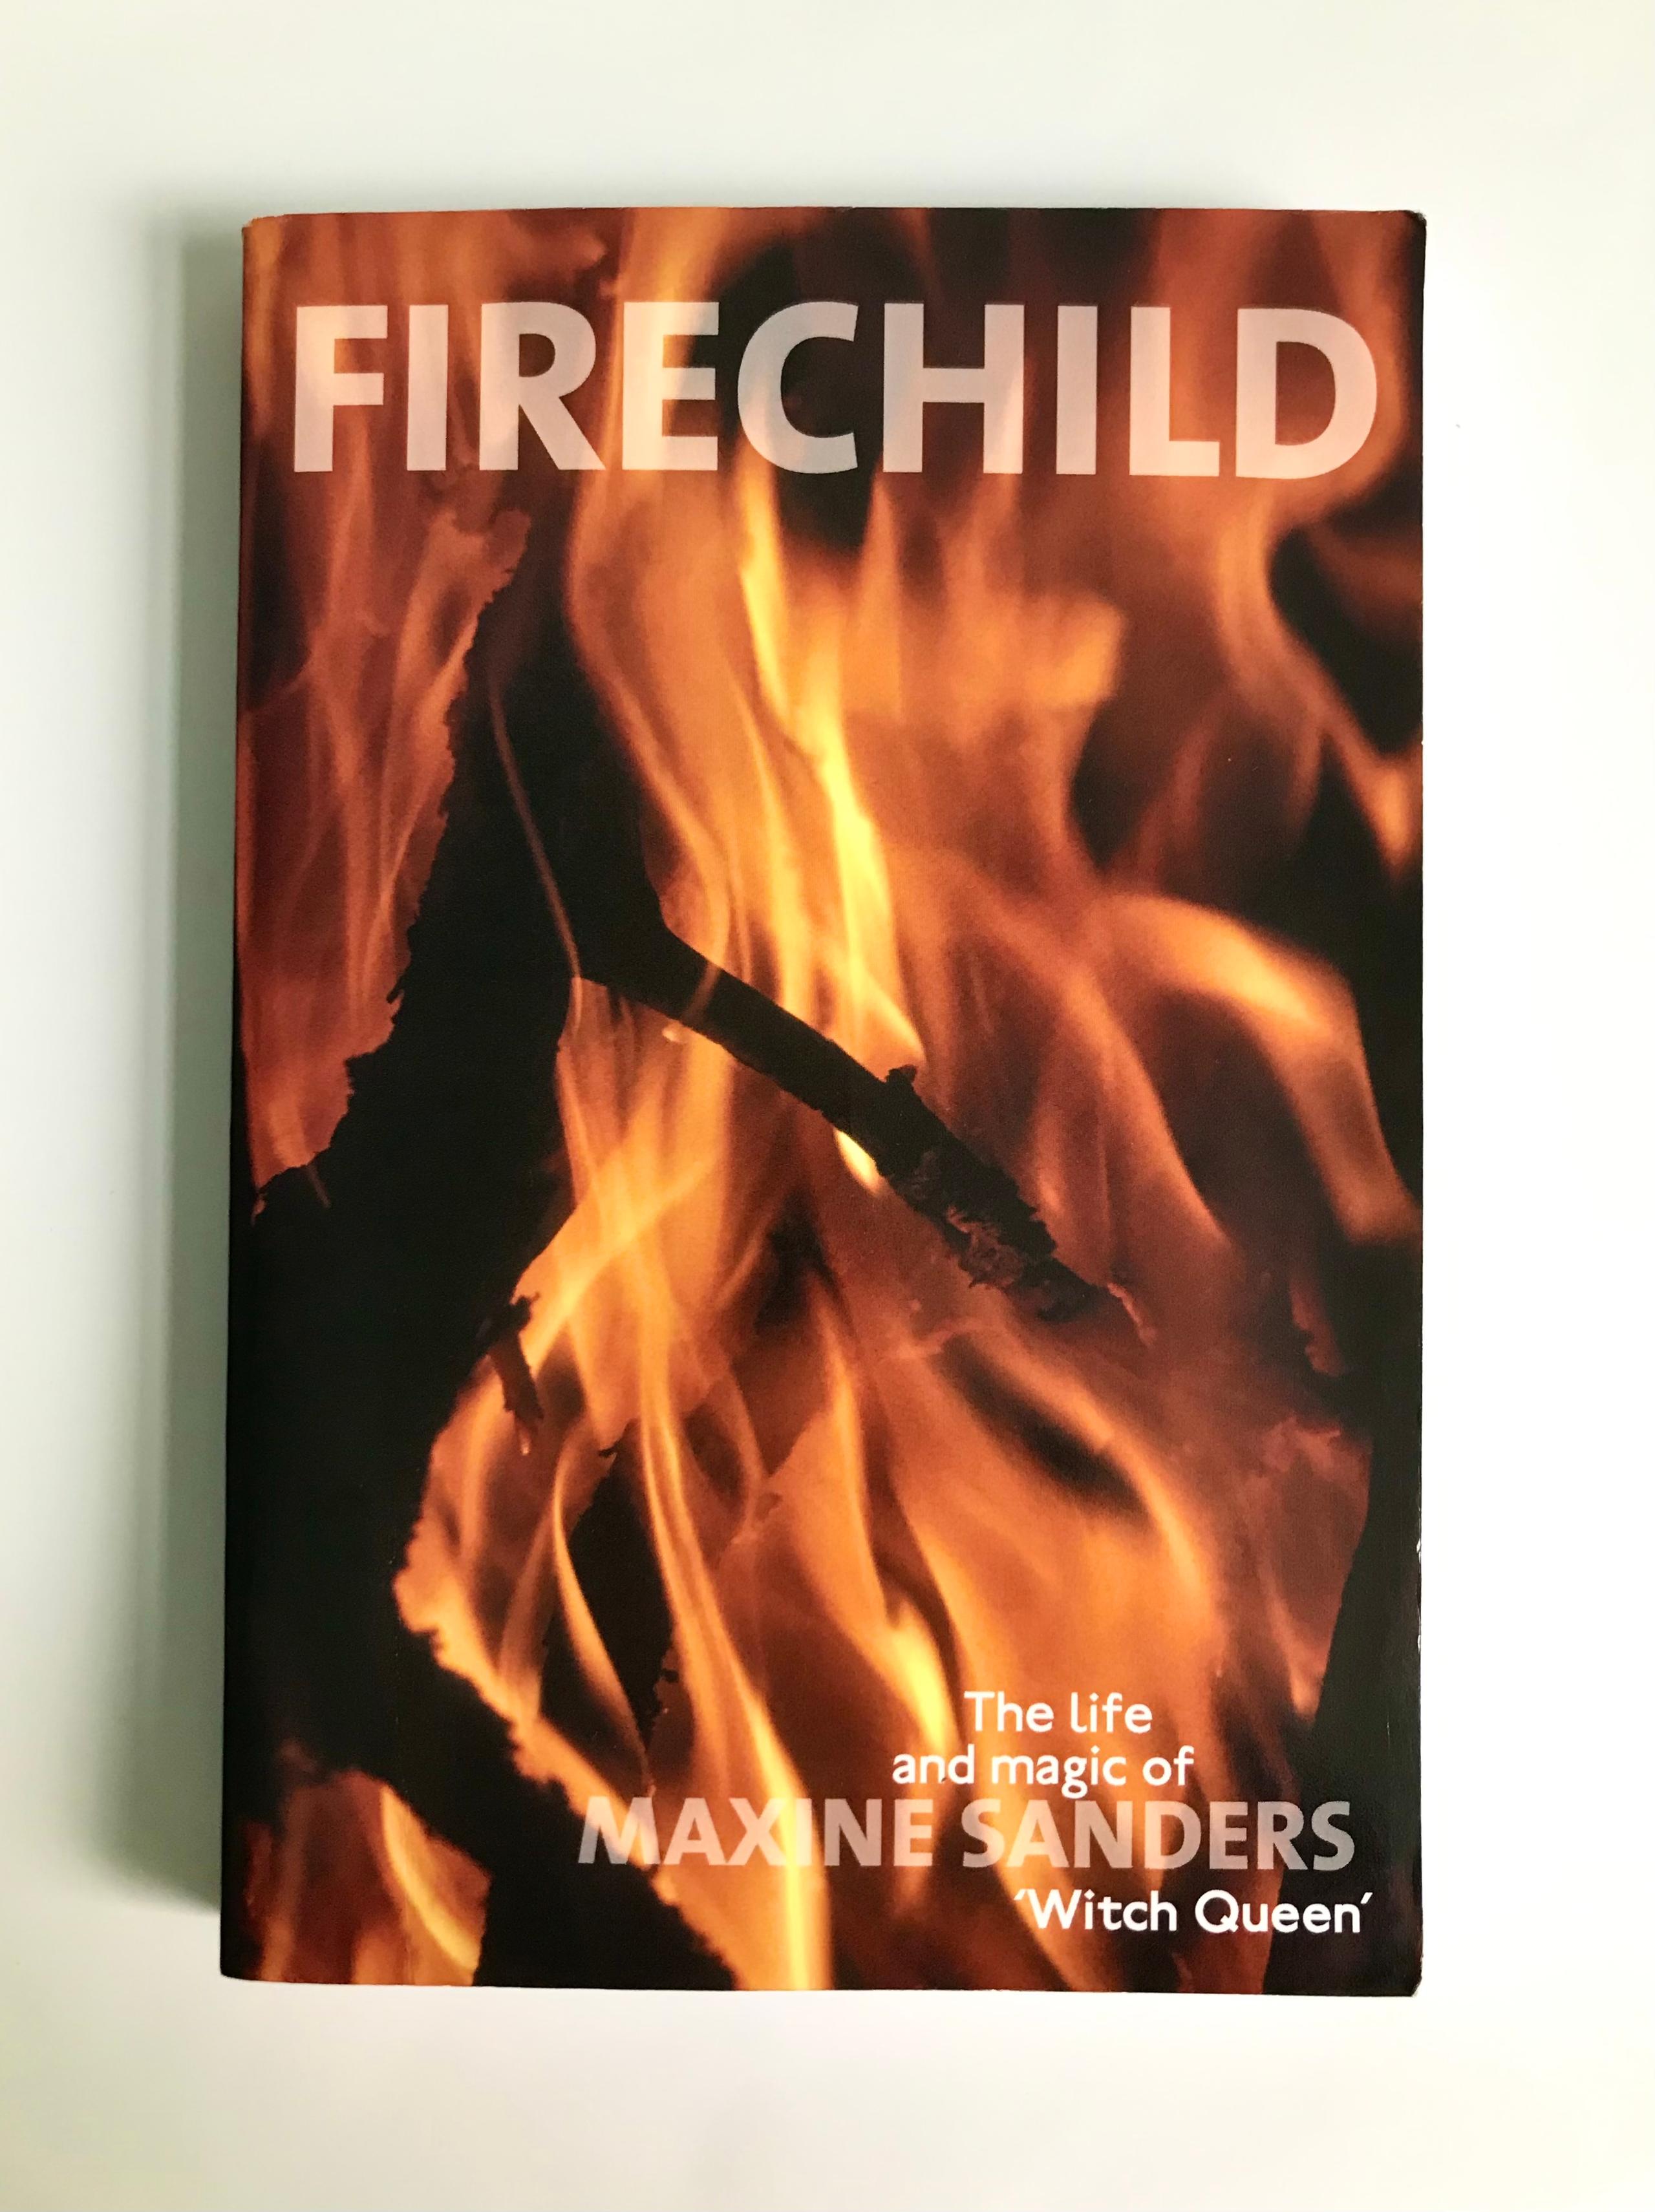 Fire Child: The Life and Magic of Maxine Sanders 'Witch Queen'